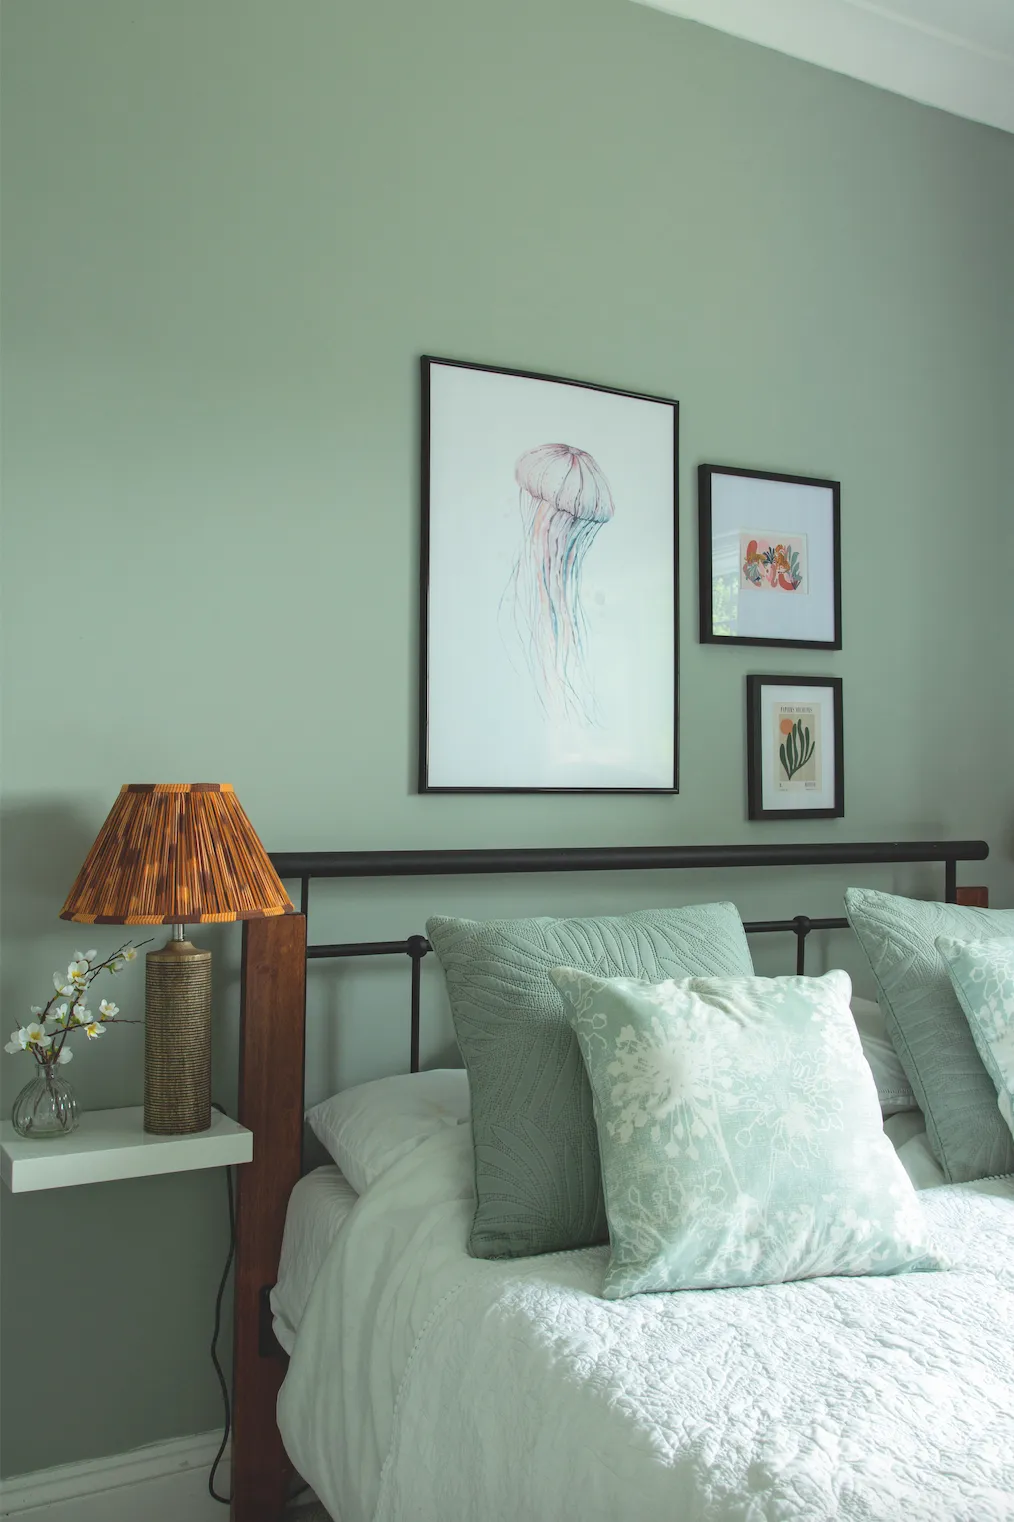 Jade wanted a restful feel in the guest room, so she went for a muted grey-green on the walls. She’s pepped it up with prints and burnt orange lampshades, which really add a playful and colourful pop to the cool green